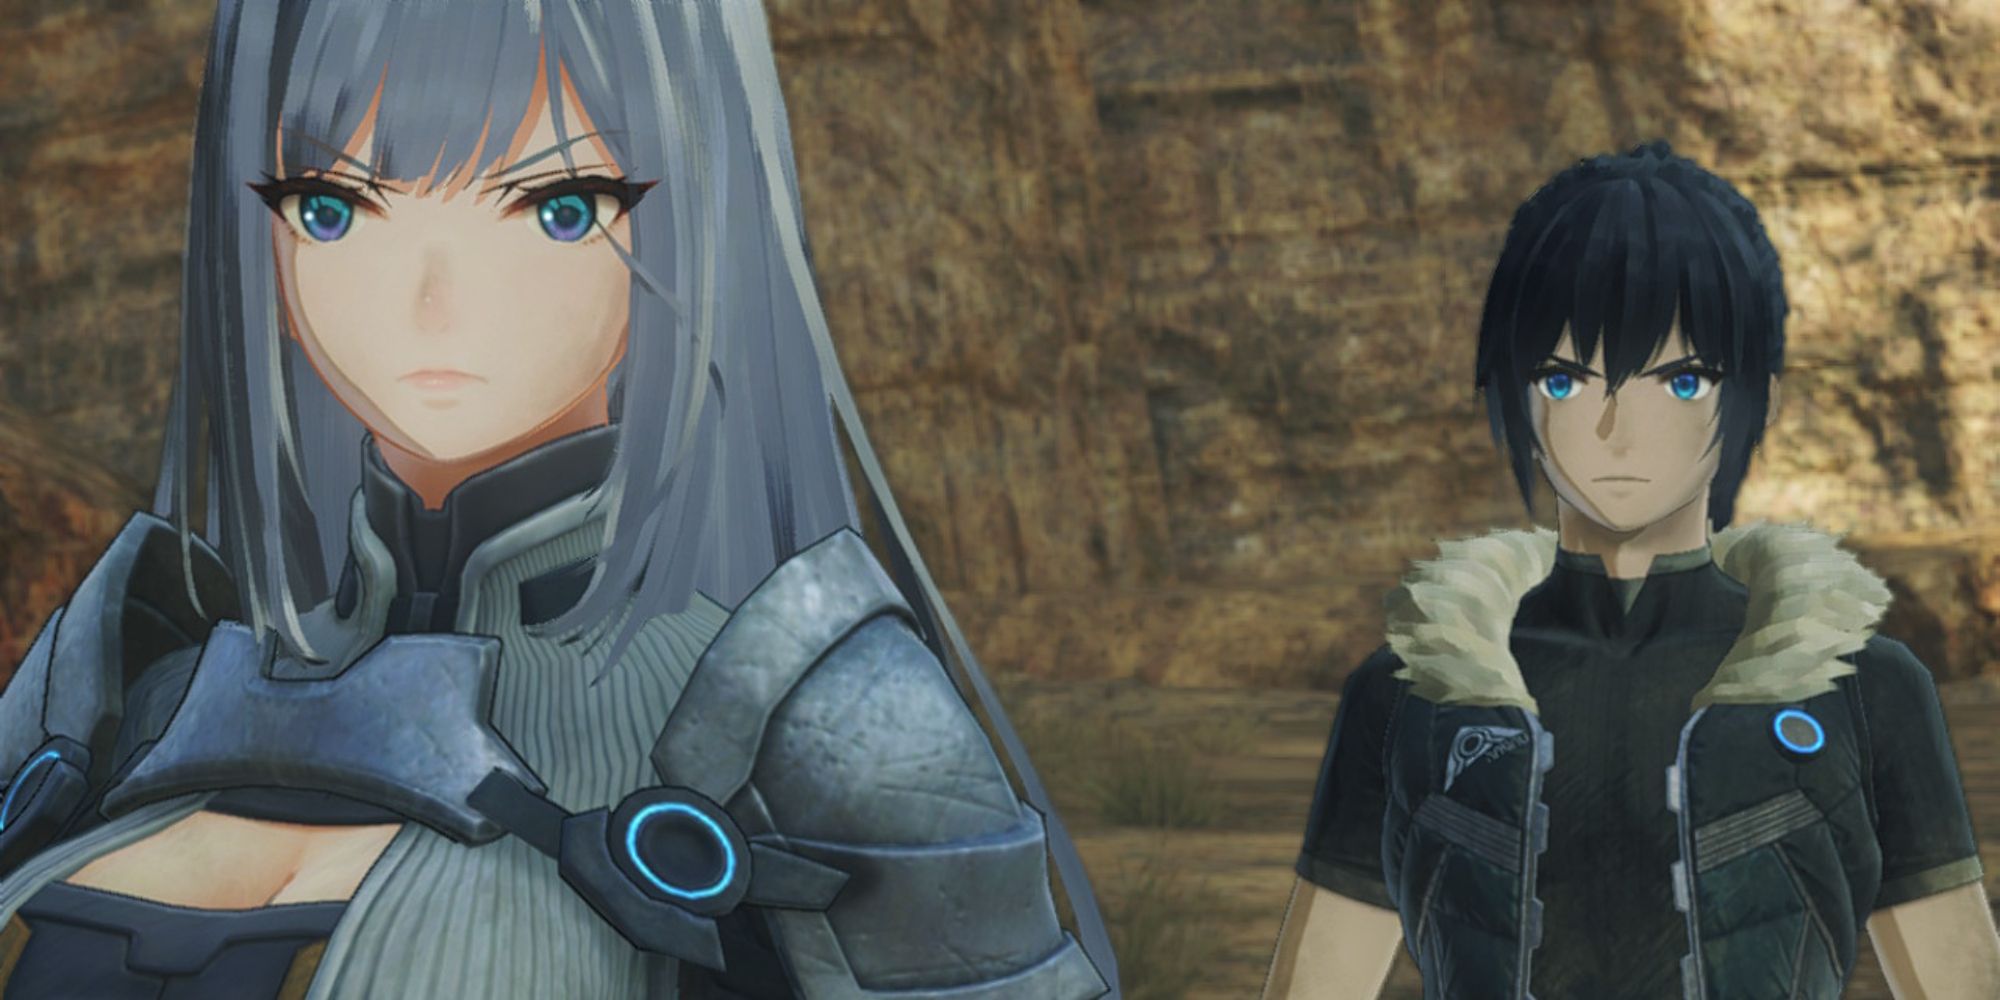 [From left to right] Ethel and Noah in Xenoblade Chronicles 3